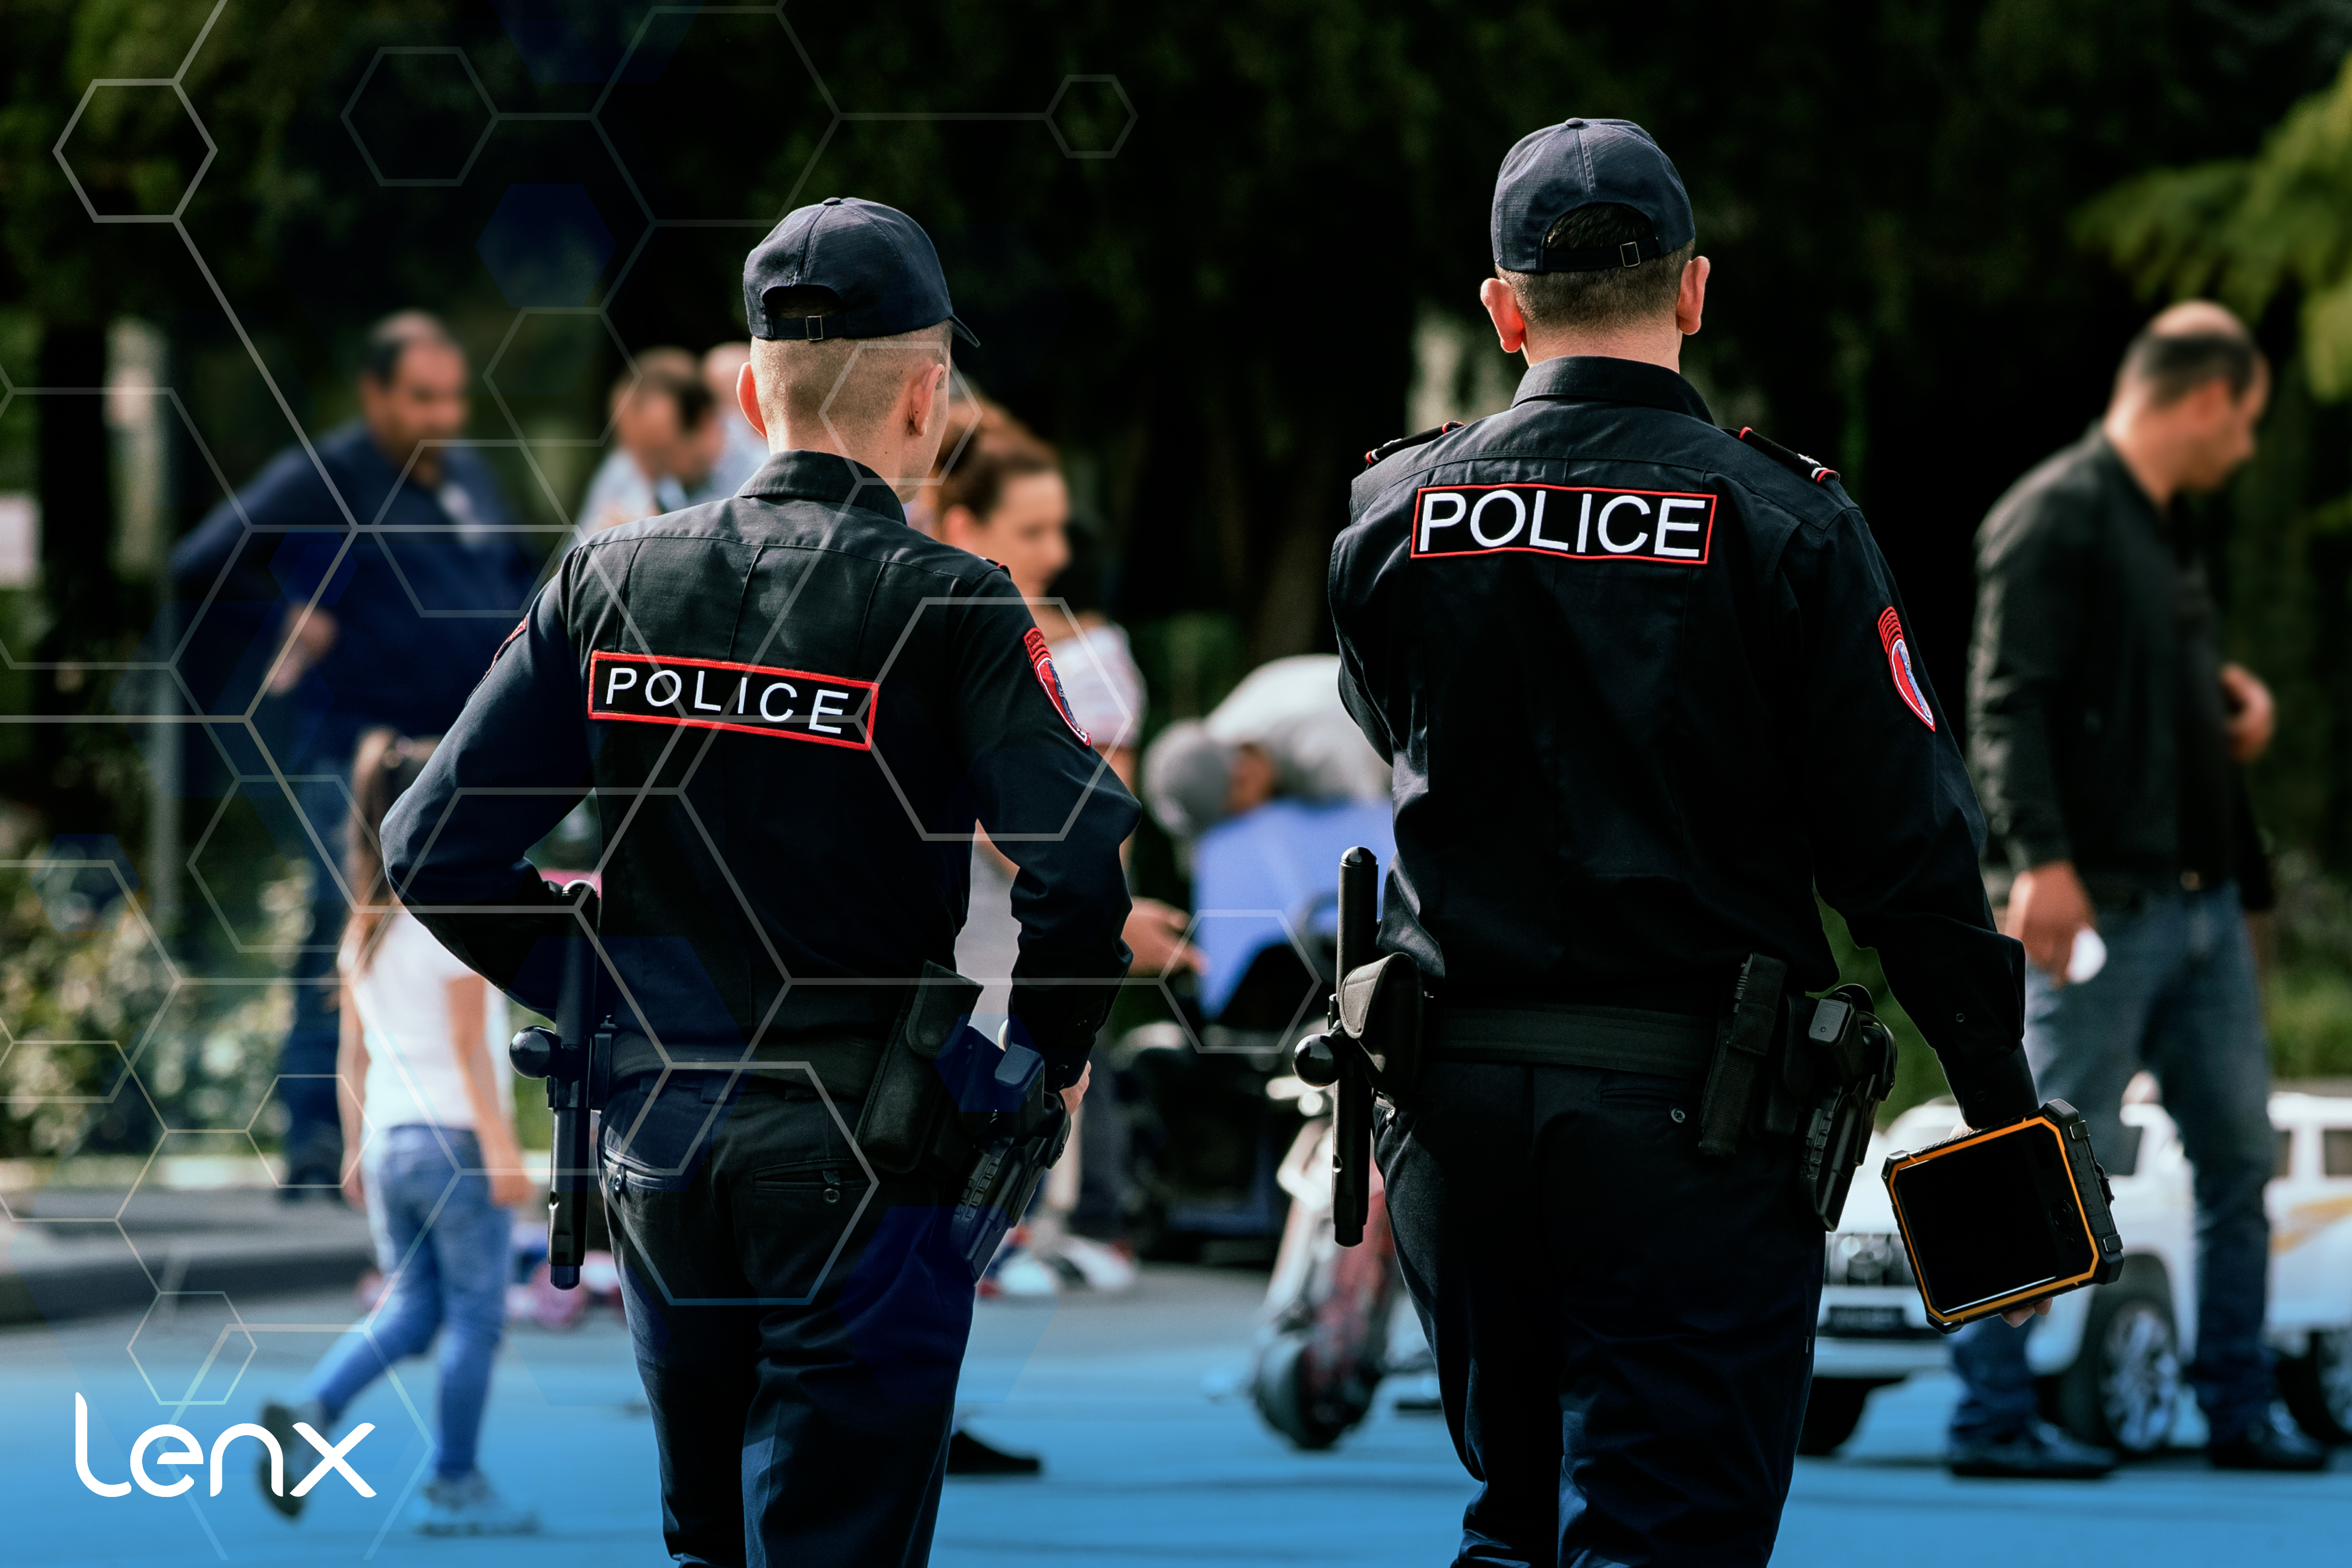 Giving First Responders Access To User Locations Using AI Security, Gun Detection Systems